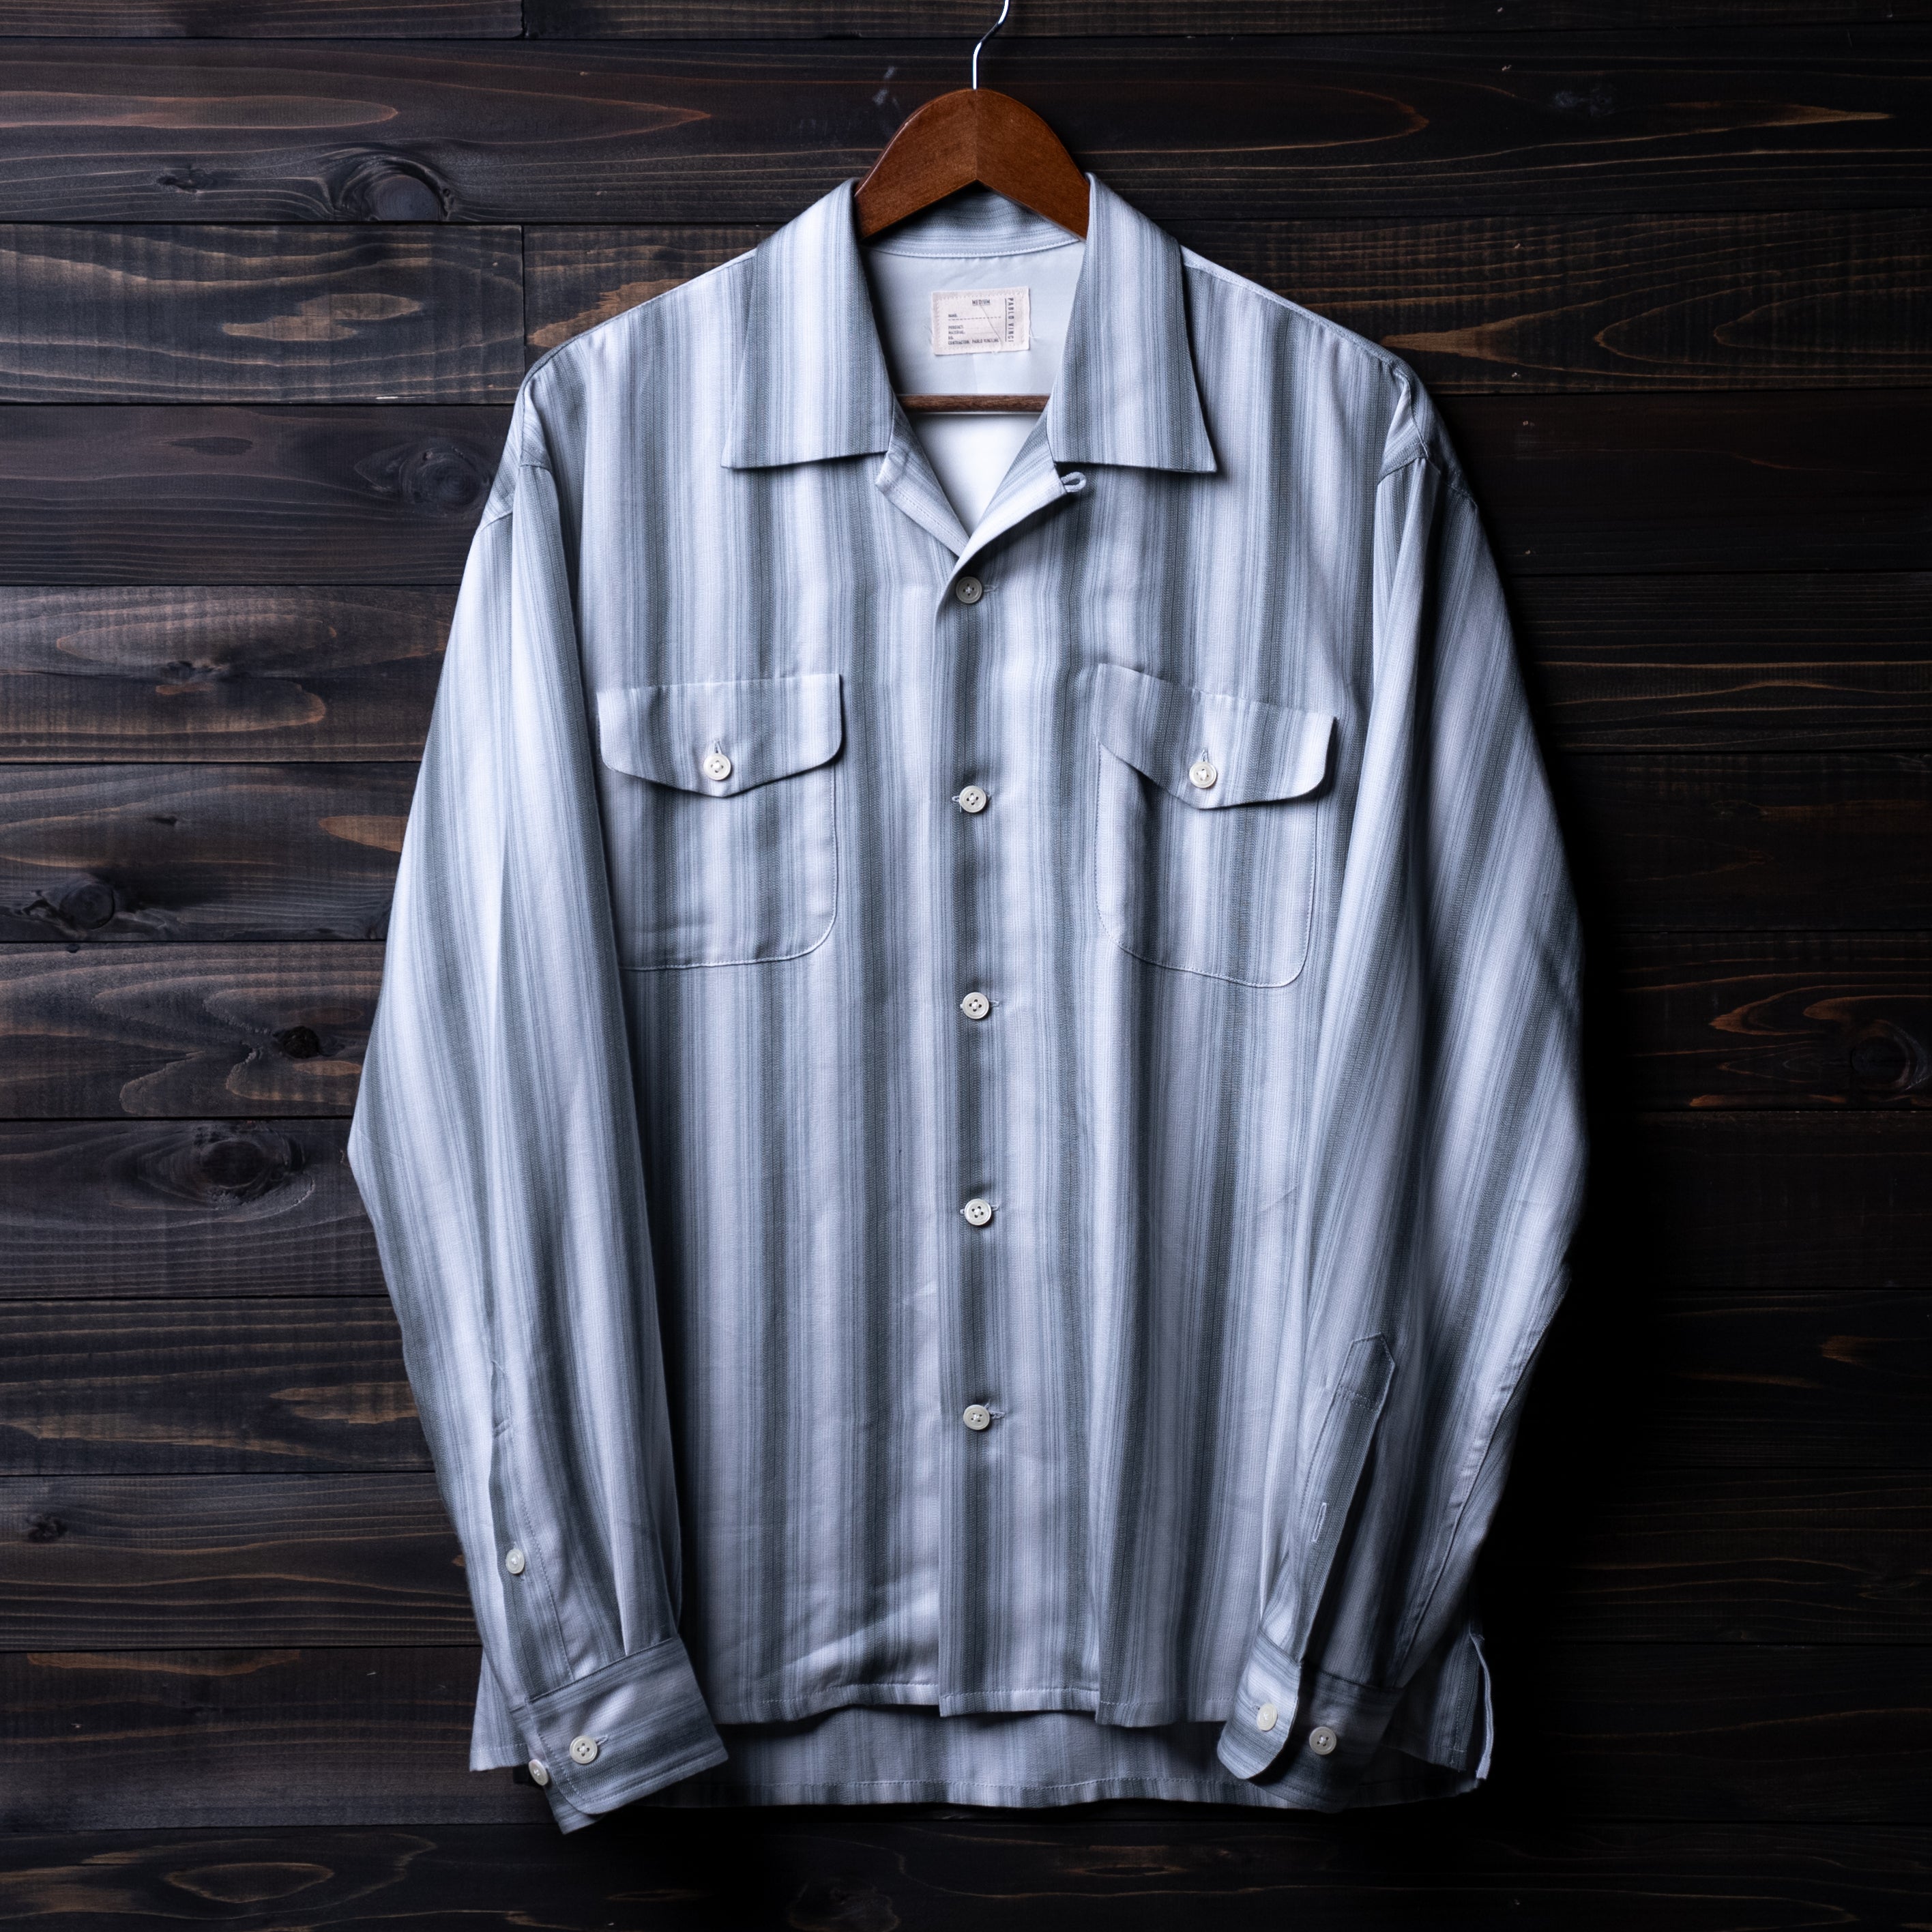 Ombre striped shirt